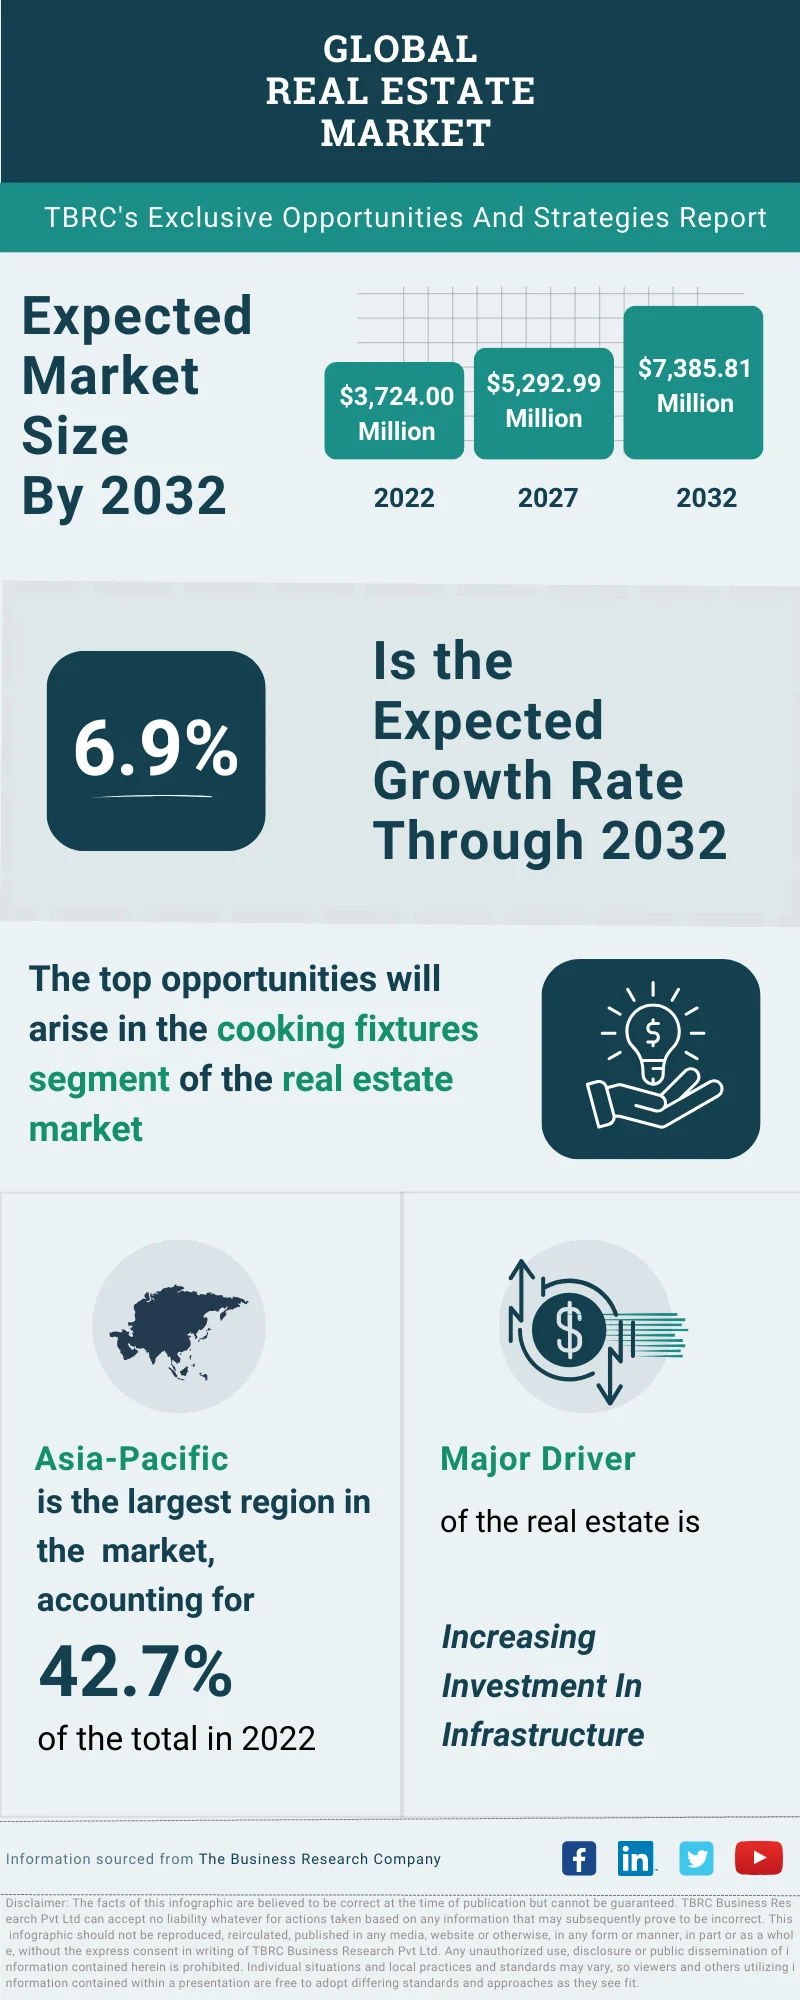 Real Estate Global Market Opportunities And Strategies To 2032